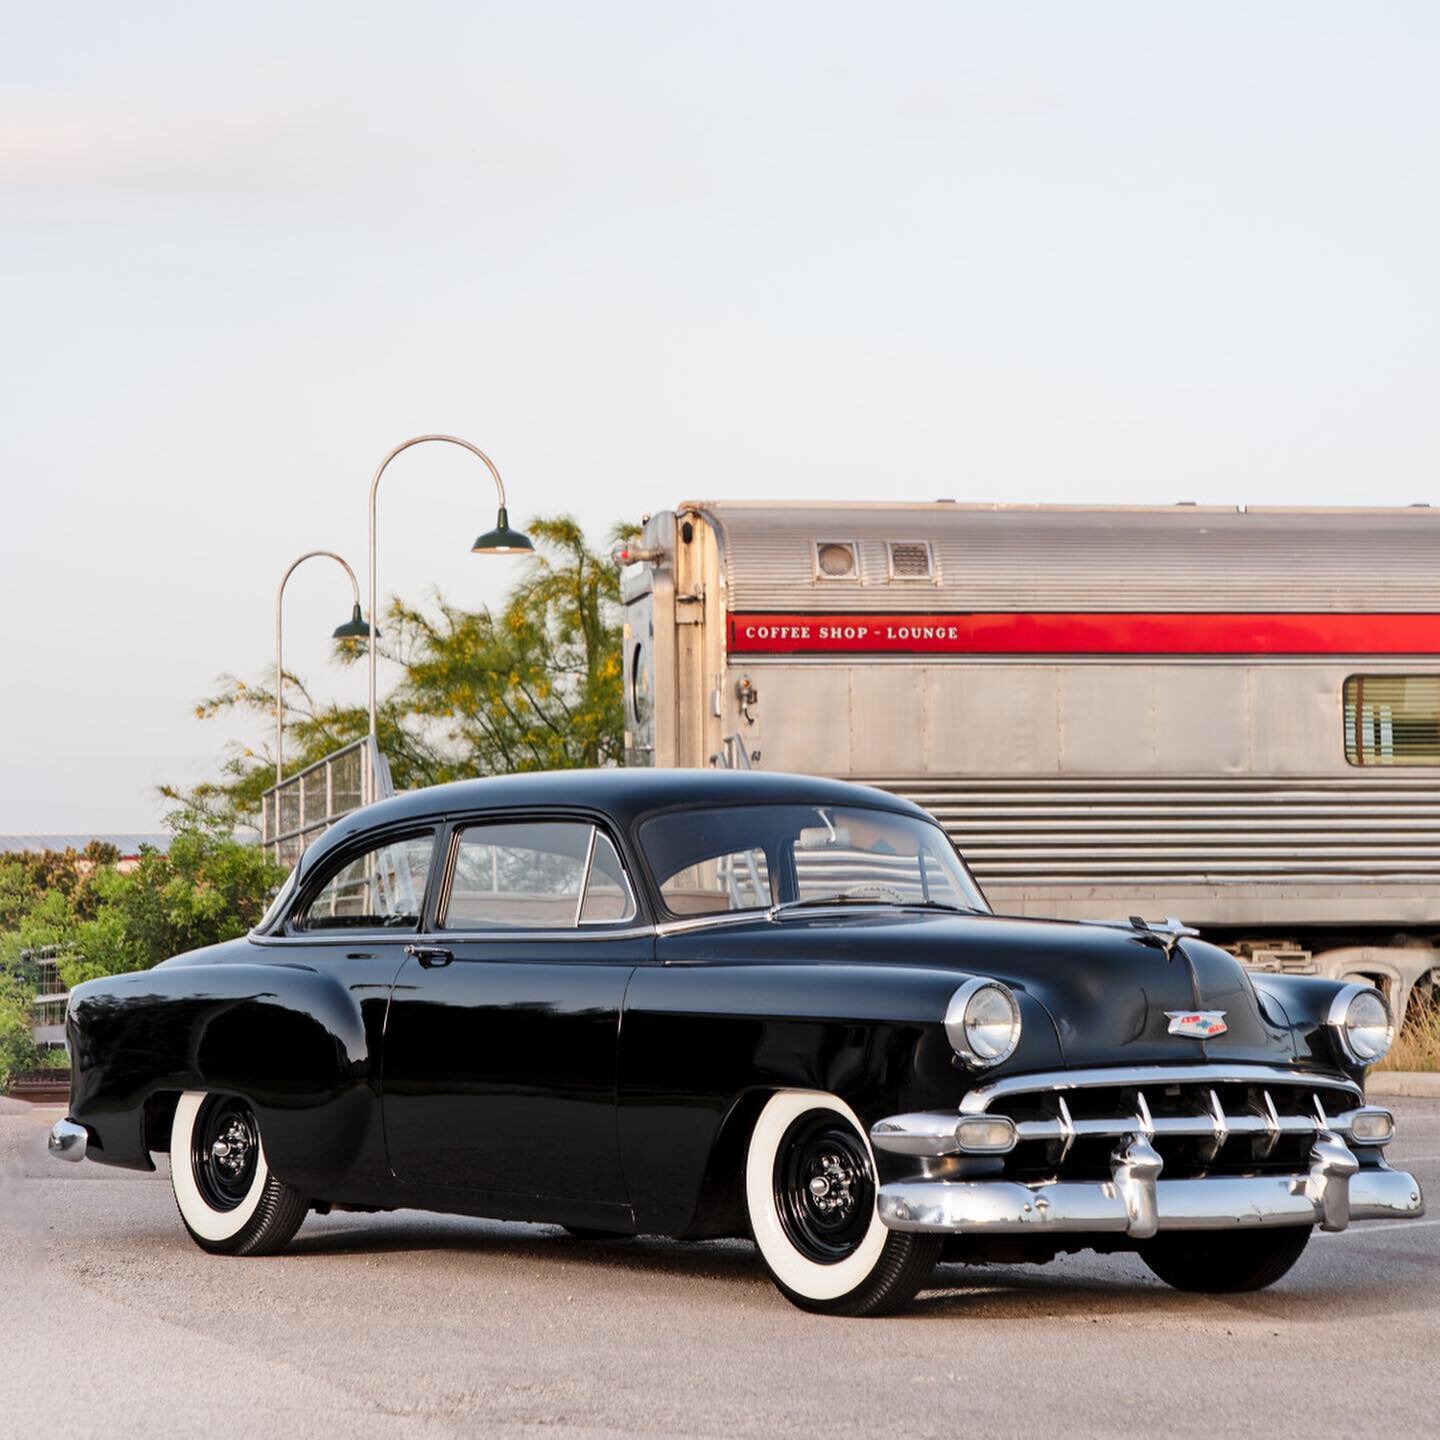 Halen King&rsquo;s 1954 Chevy featured in the newest issue of Car Kulture Deluxe!✨ 

A special thank you to assistance by @gittebarnhouse on this windy summer day! 

@carkulturedeluxe.olskoolrodz 
.
.
.
#shelbygouldimaging #carkulturedeluxe #ckd104 #